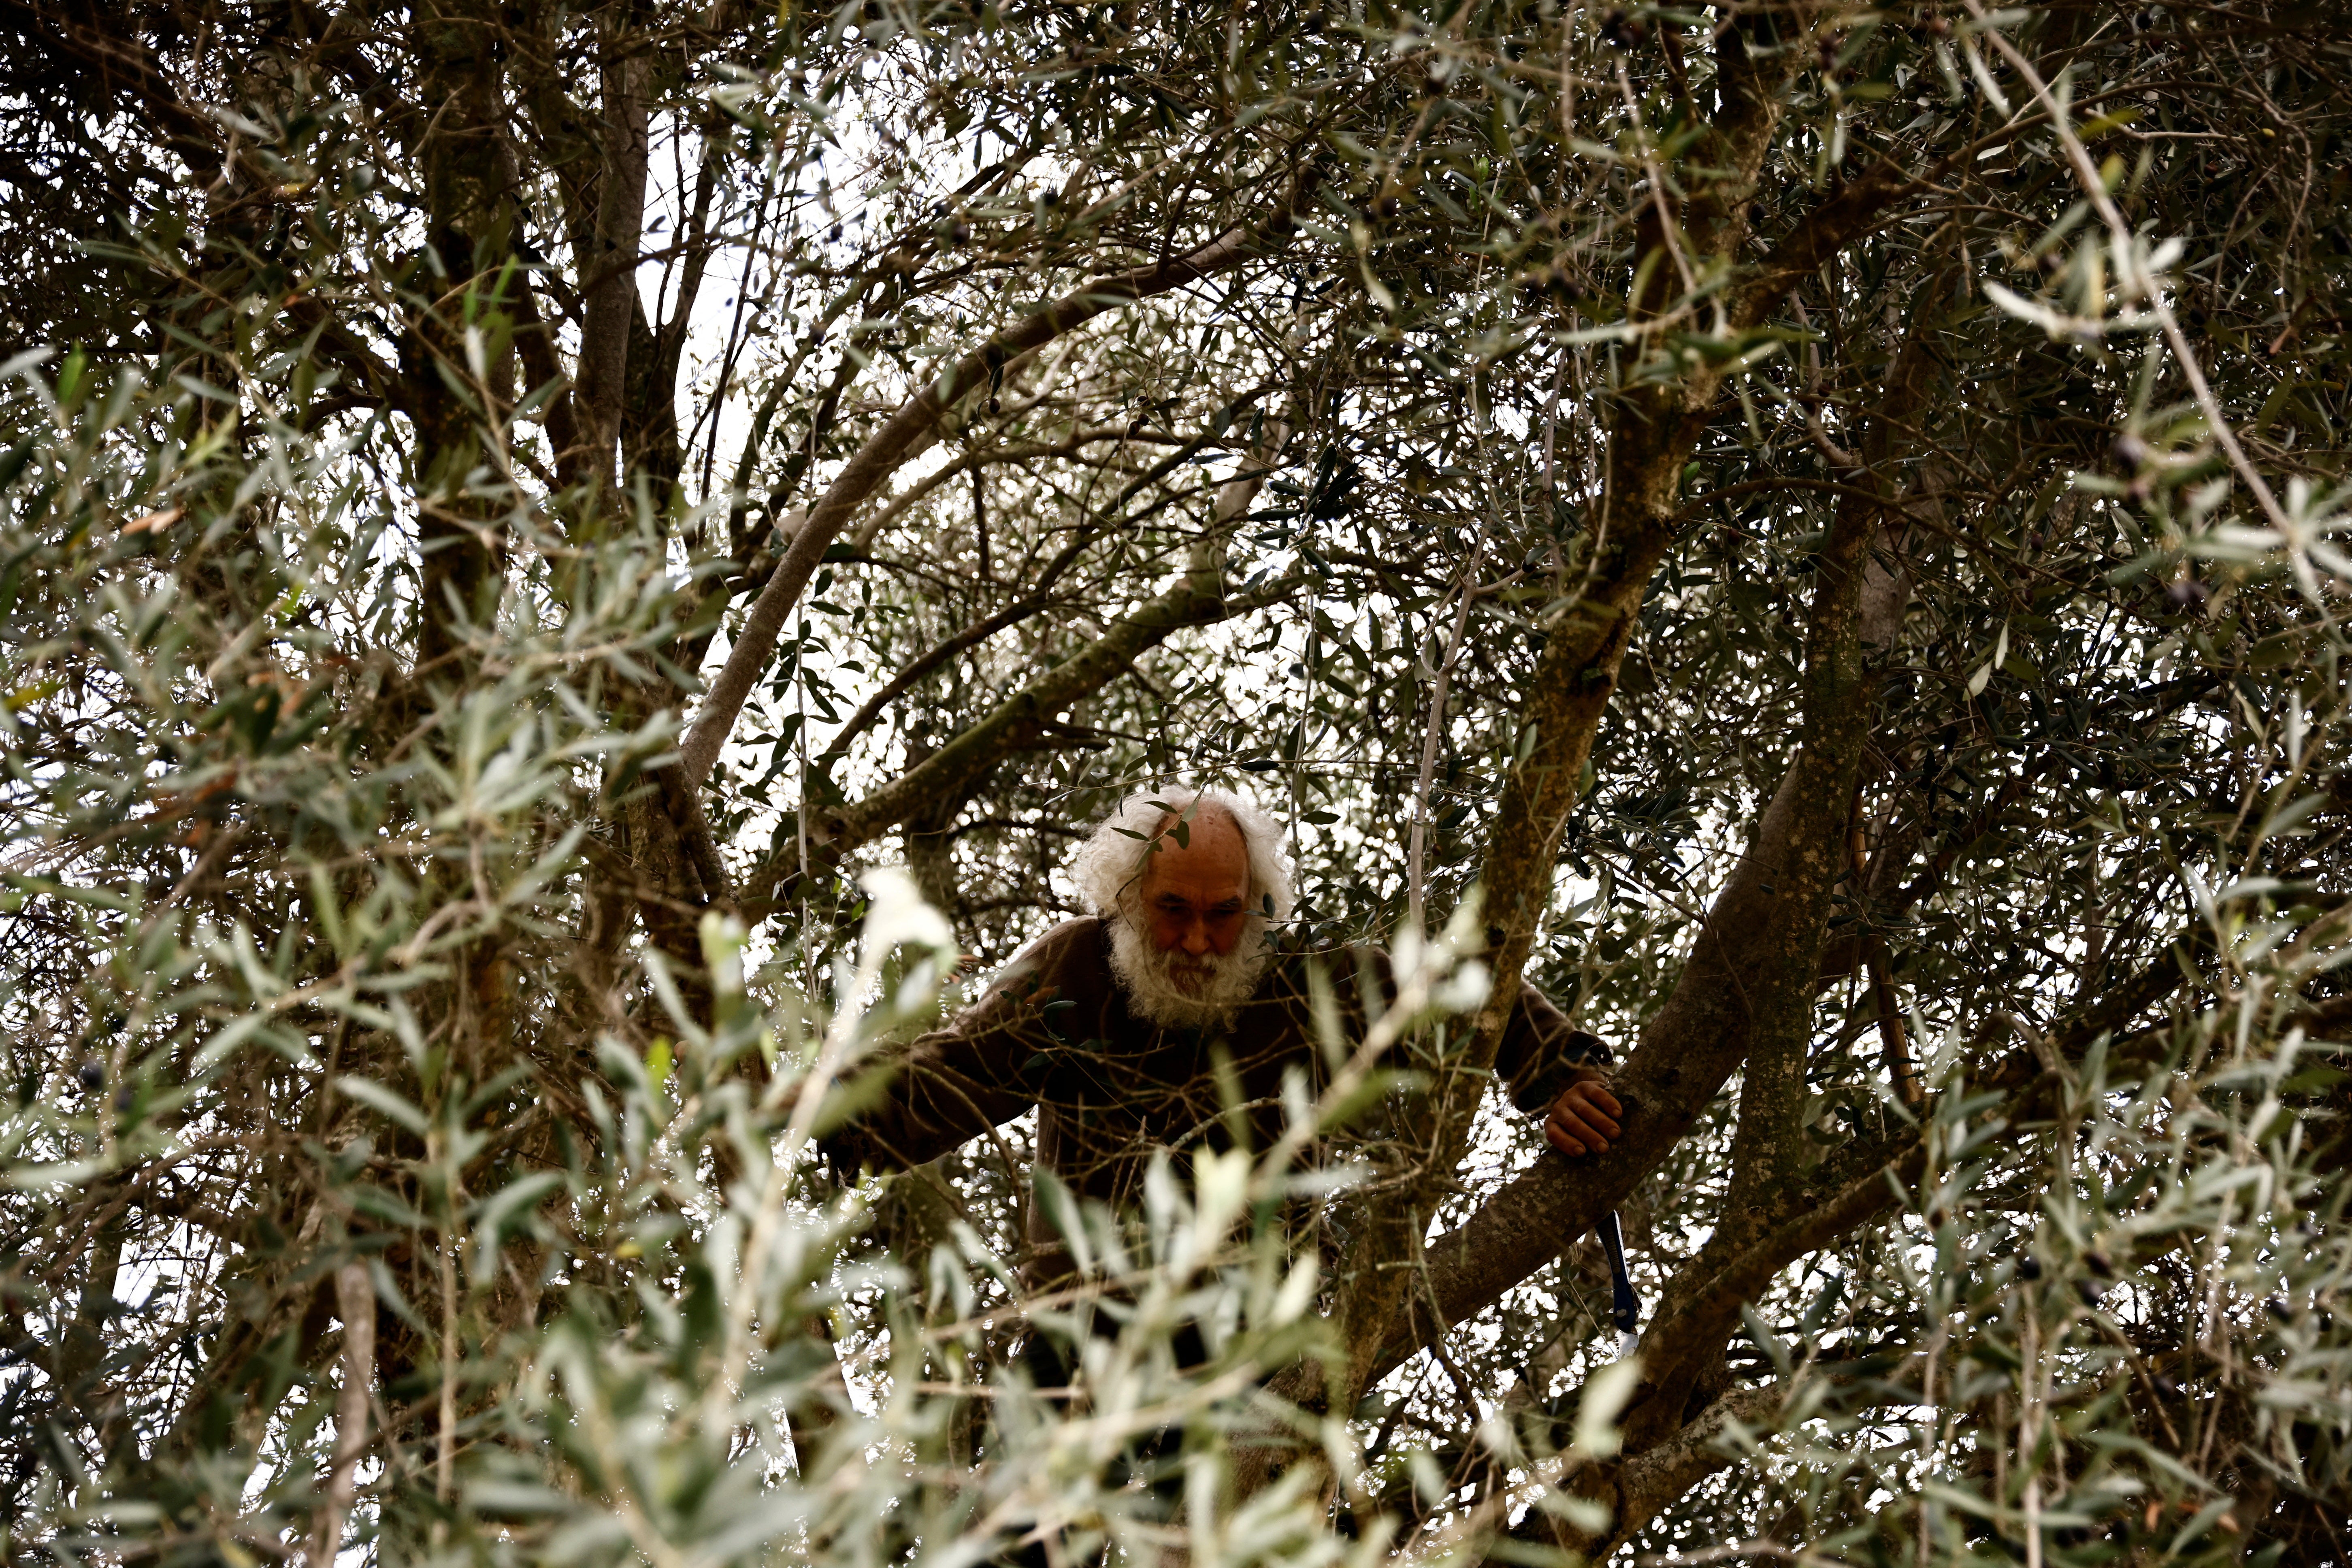 The 72-year-old climbs a tree to harvest olives